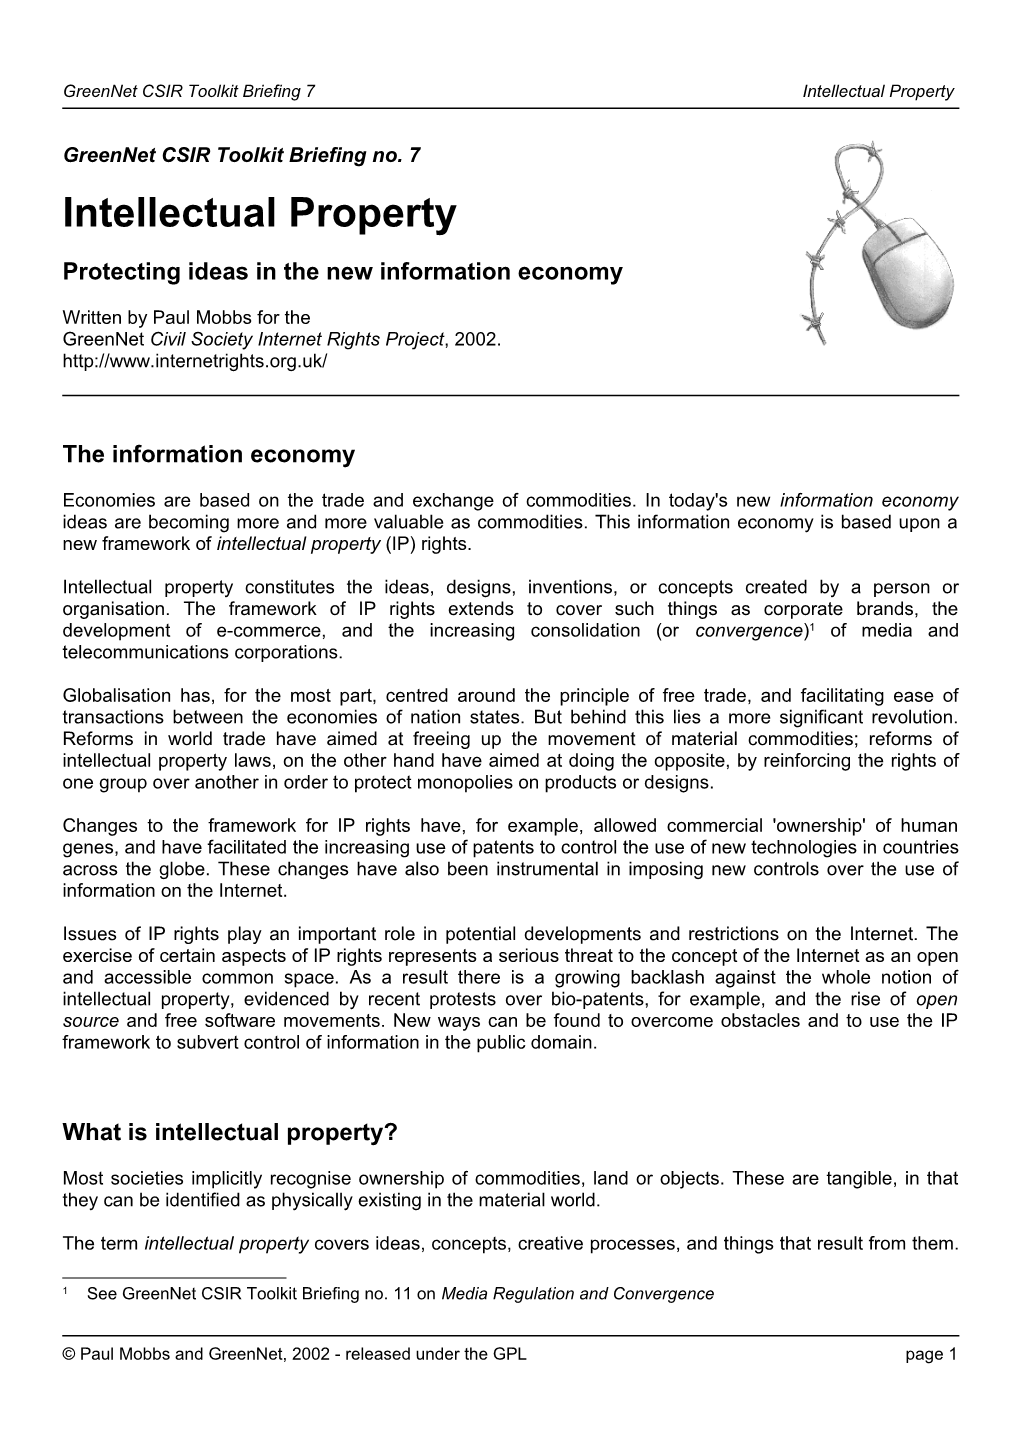 Greennet CSIR Toolkit Briefing 7Intellectual Property